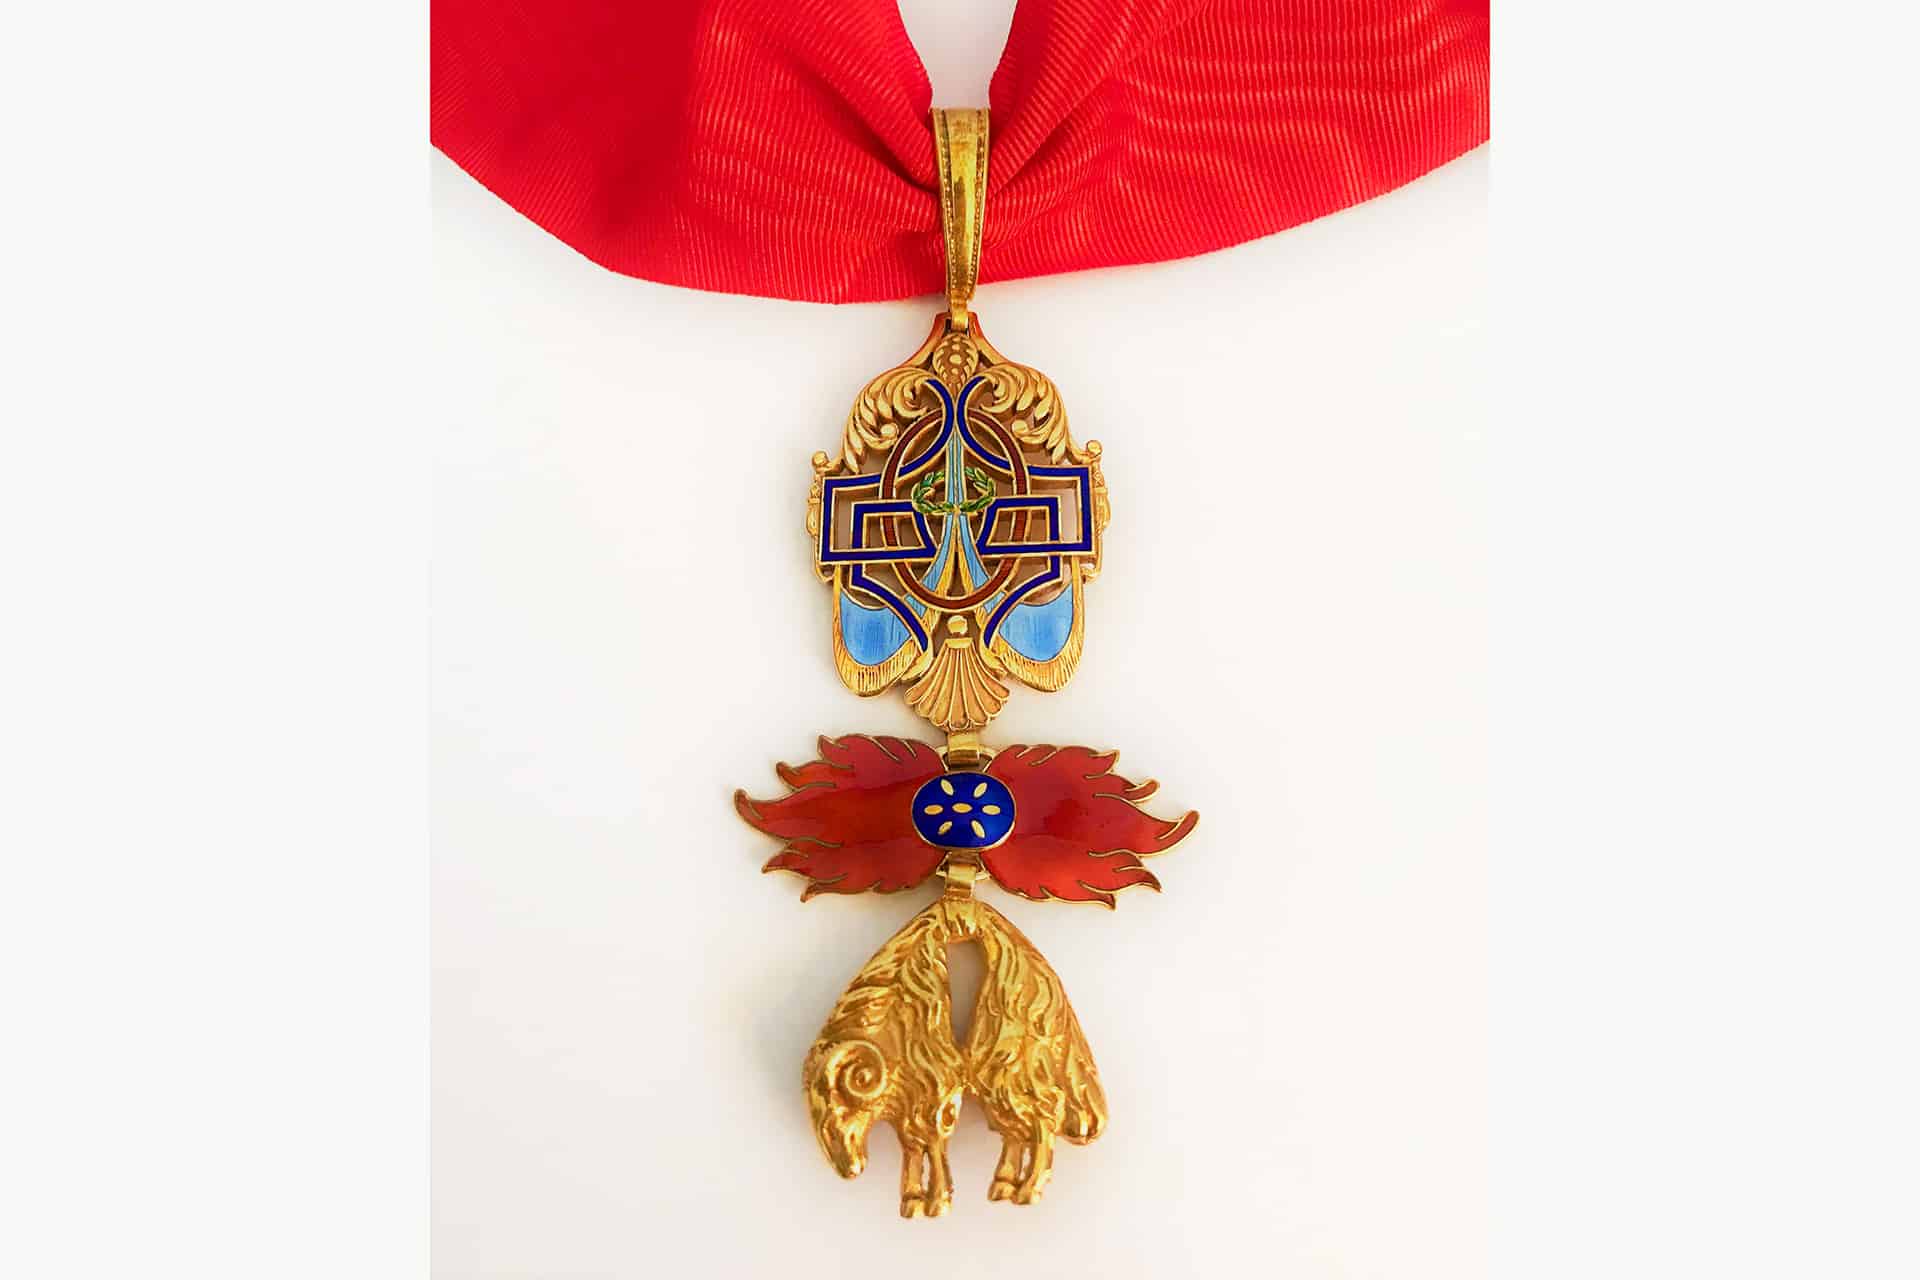 Insignia of a Knight of the Order of the Golden Fleece of Spain. Modern manufacture, Cejalvo (Madrid).